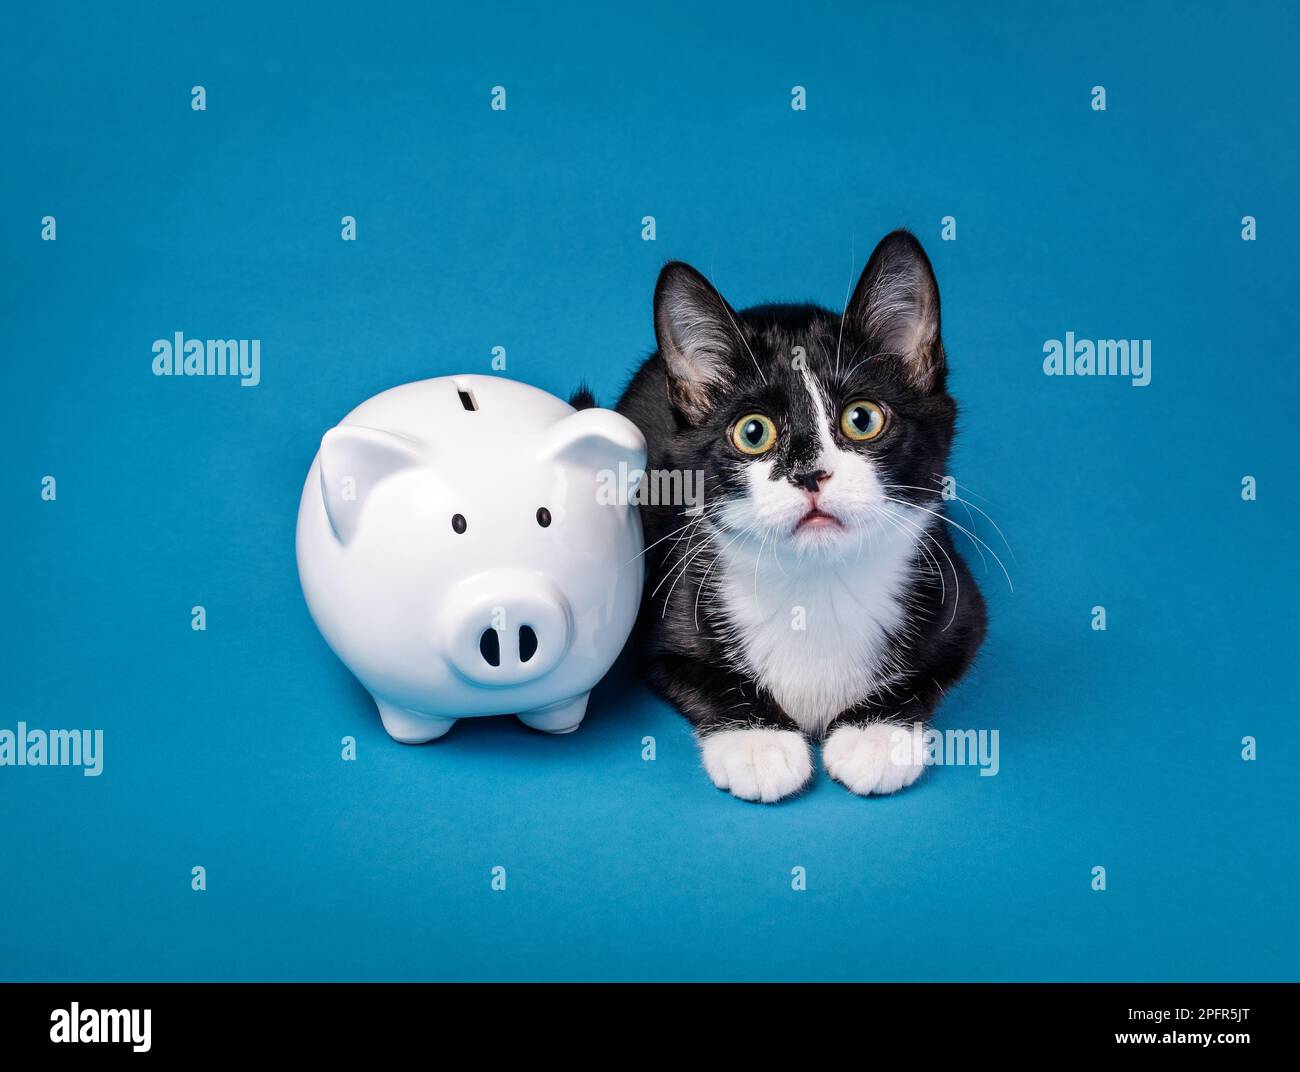 Cute little tuxedo kitten looks needy next to a piggy bank on a blue background. Animal Charity, donate to rescue, adoption fee or cost of care concep Stock Photo